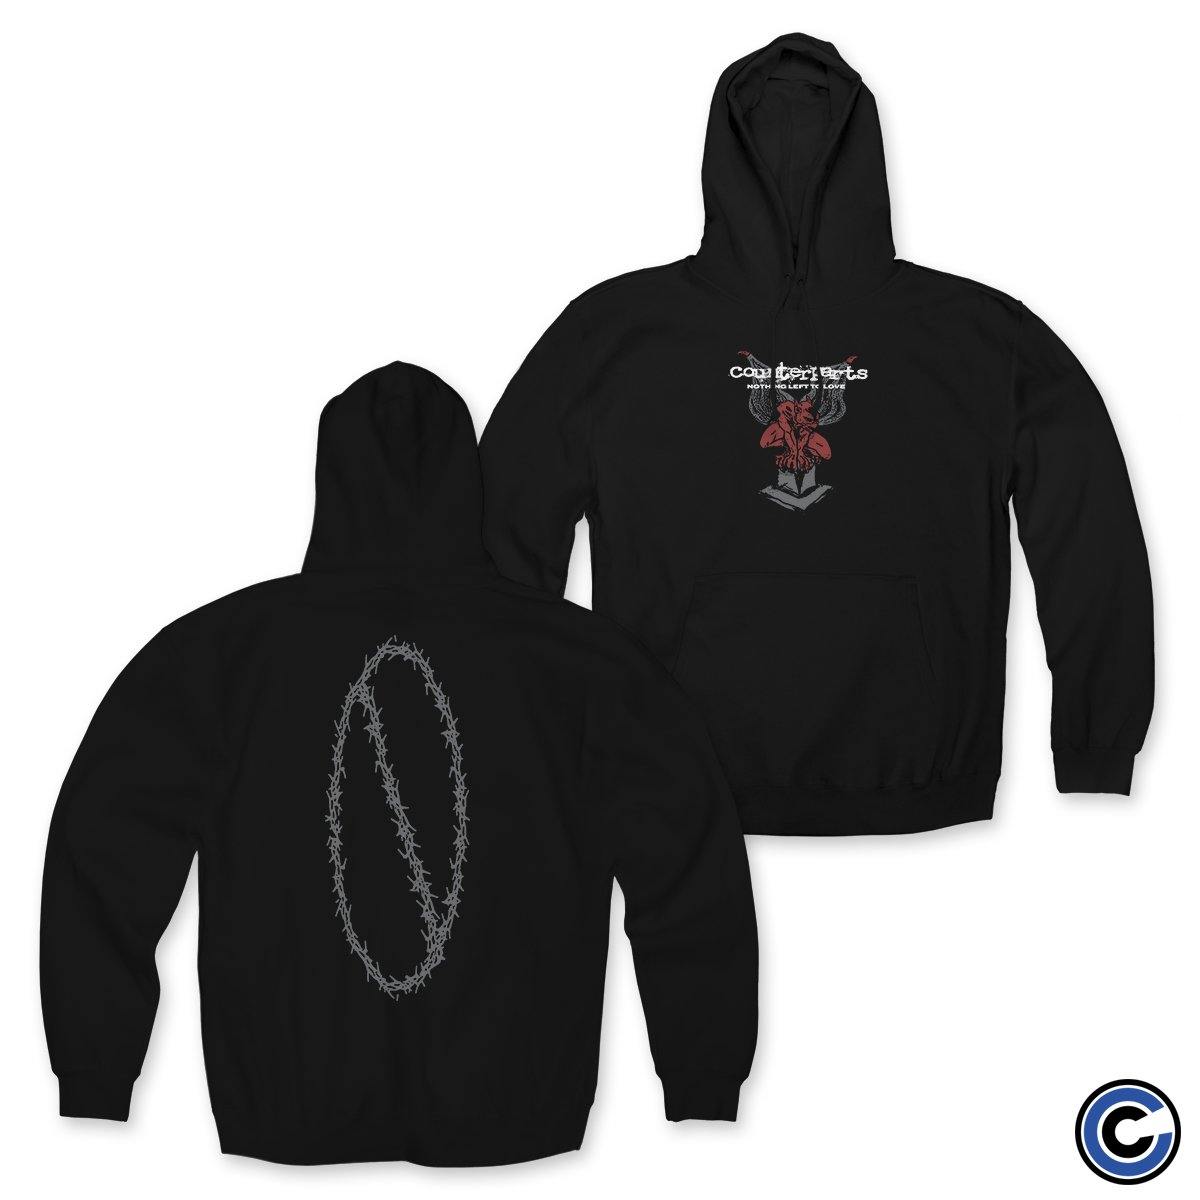 Buy – Counterparts "Demon" Hoodie – Band & Music Merch – Cold Cuts Merch